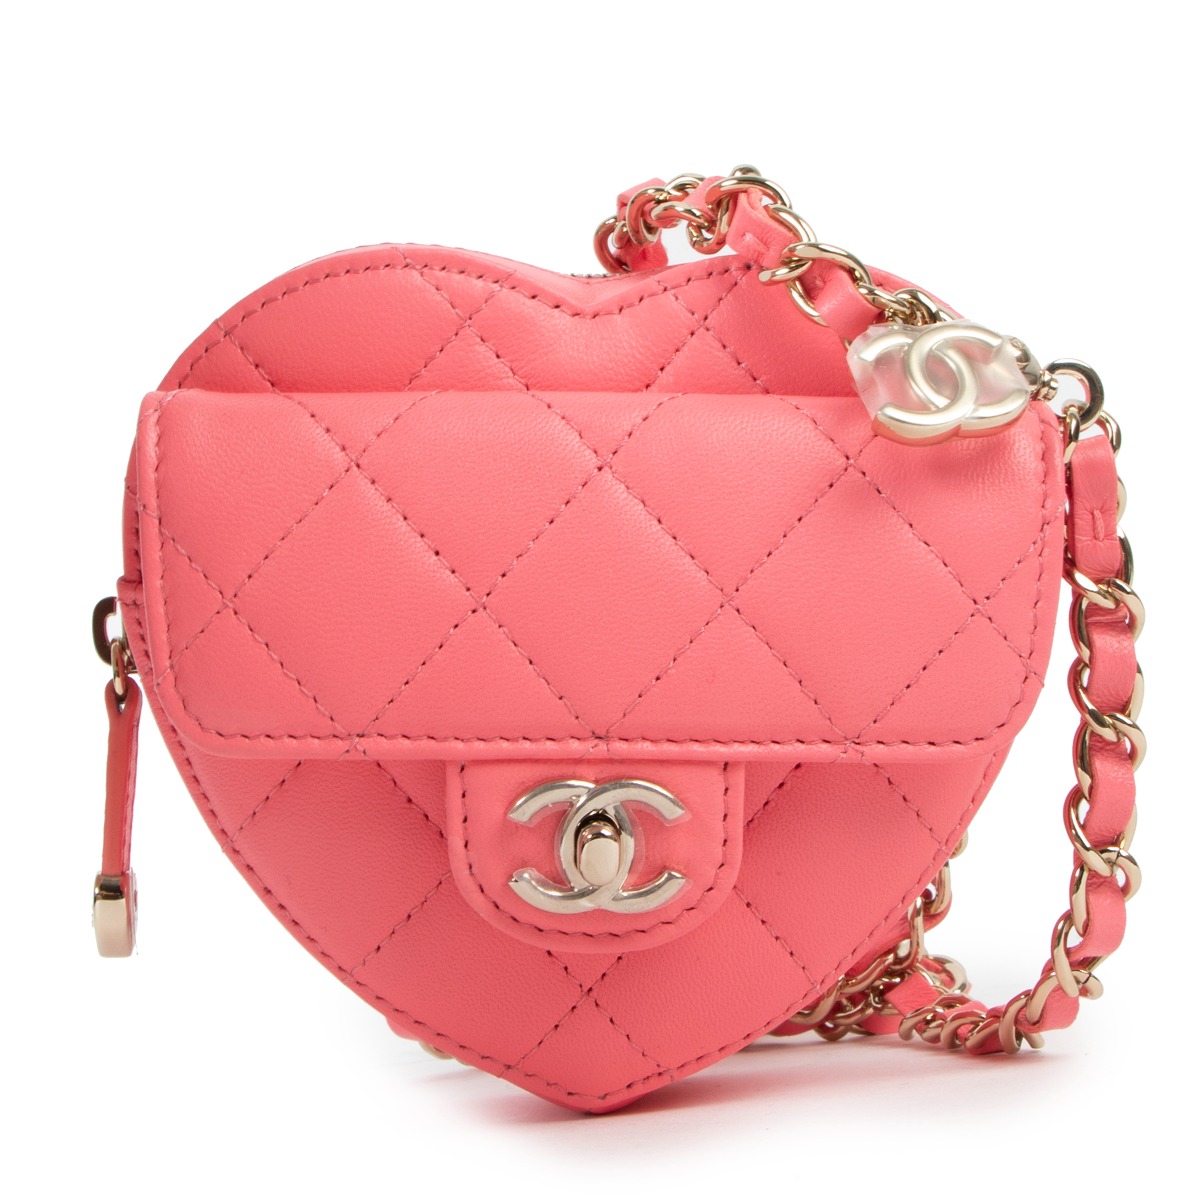 Sotheby's Specialists Picks: Pink Chanel Bag | Handbags and Accessories |  Sotheby's